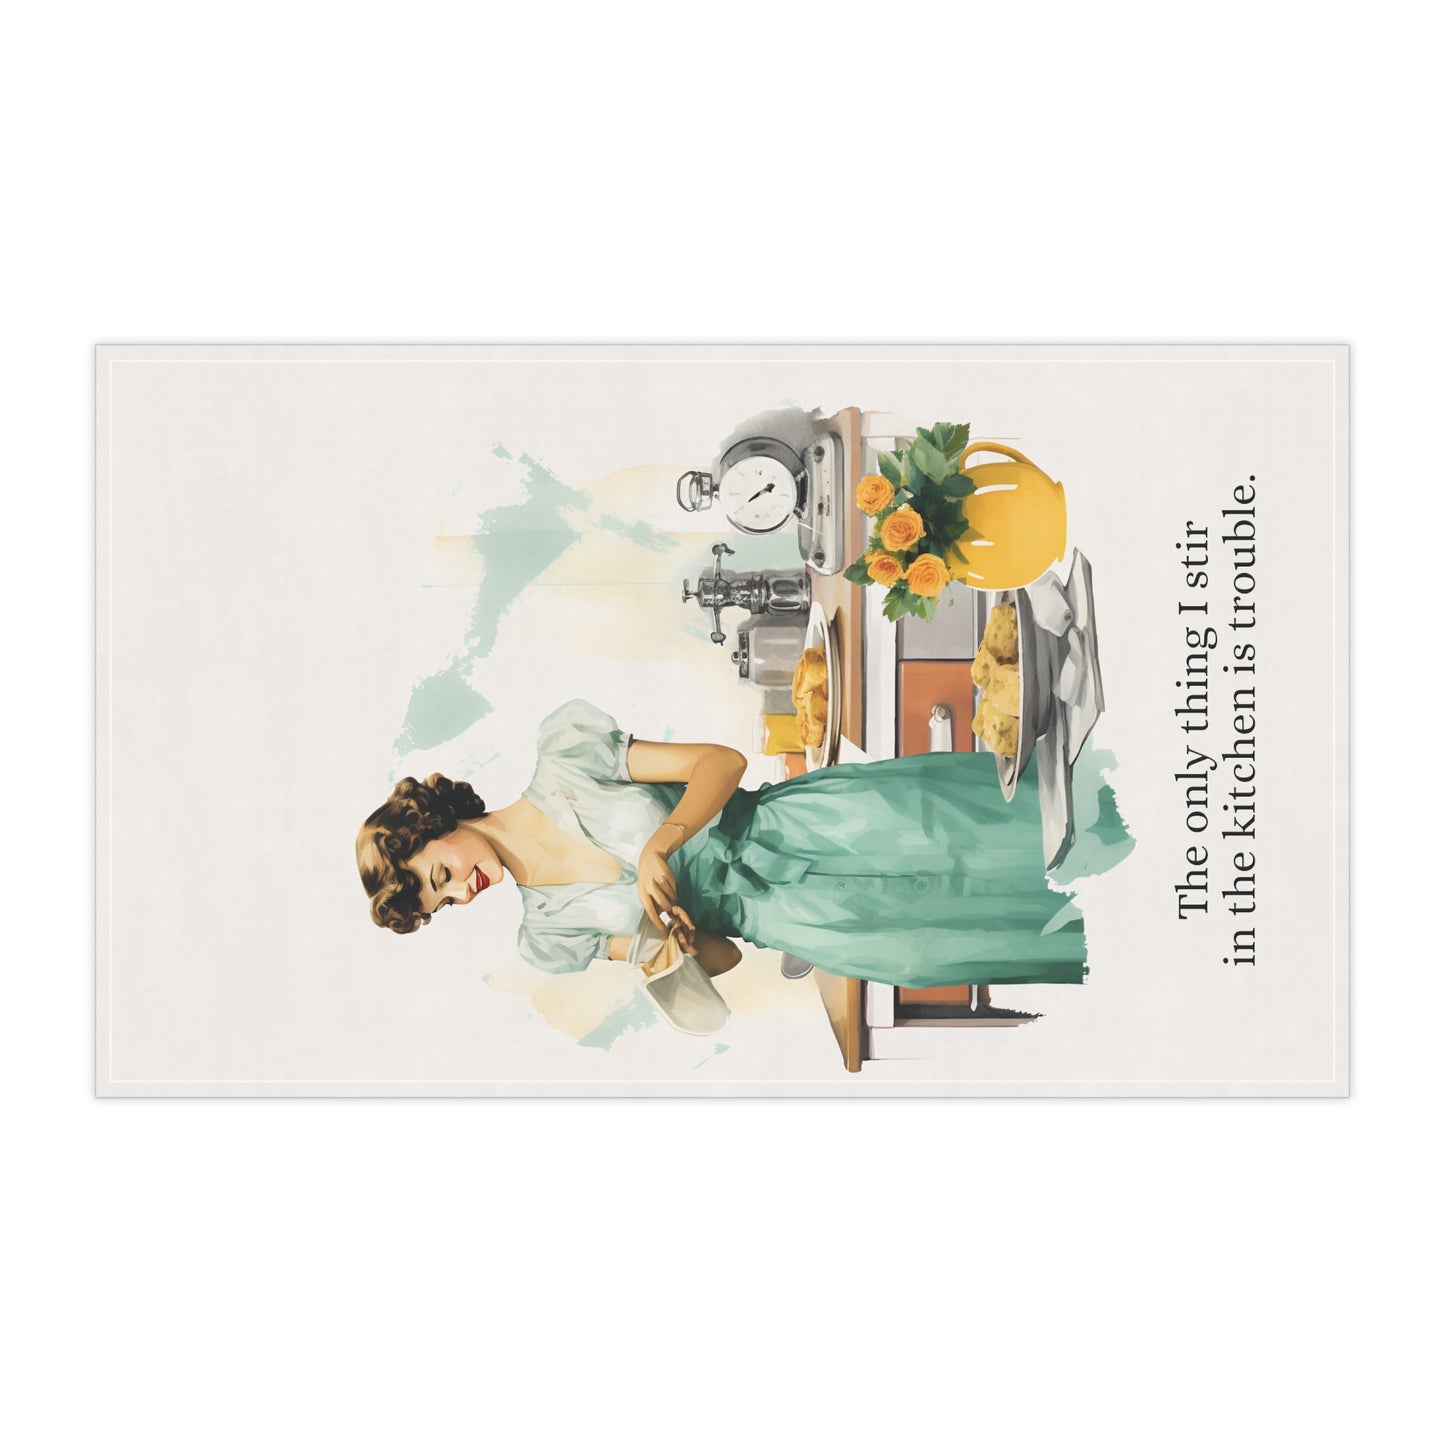 The Only Thing I Stir in the Kitchen is Trouble Cotton Vintage Funny Sarcastic Kitchen Towel